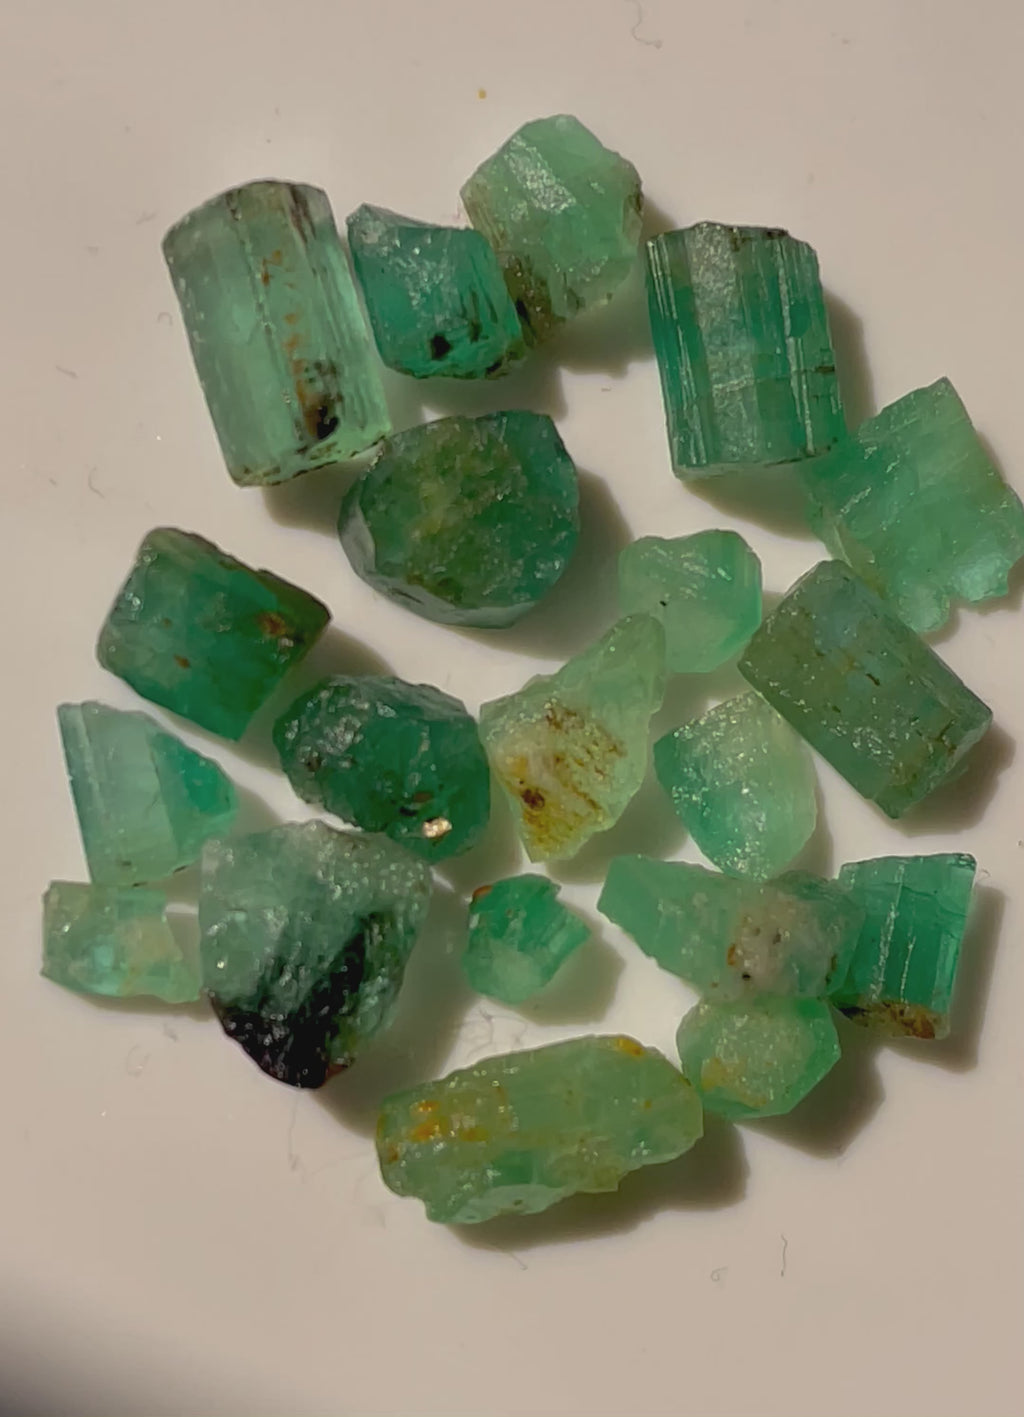 You May Also Like This Emerald Stones Videos.